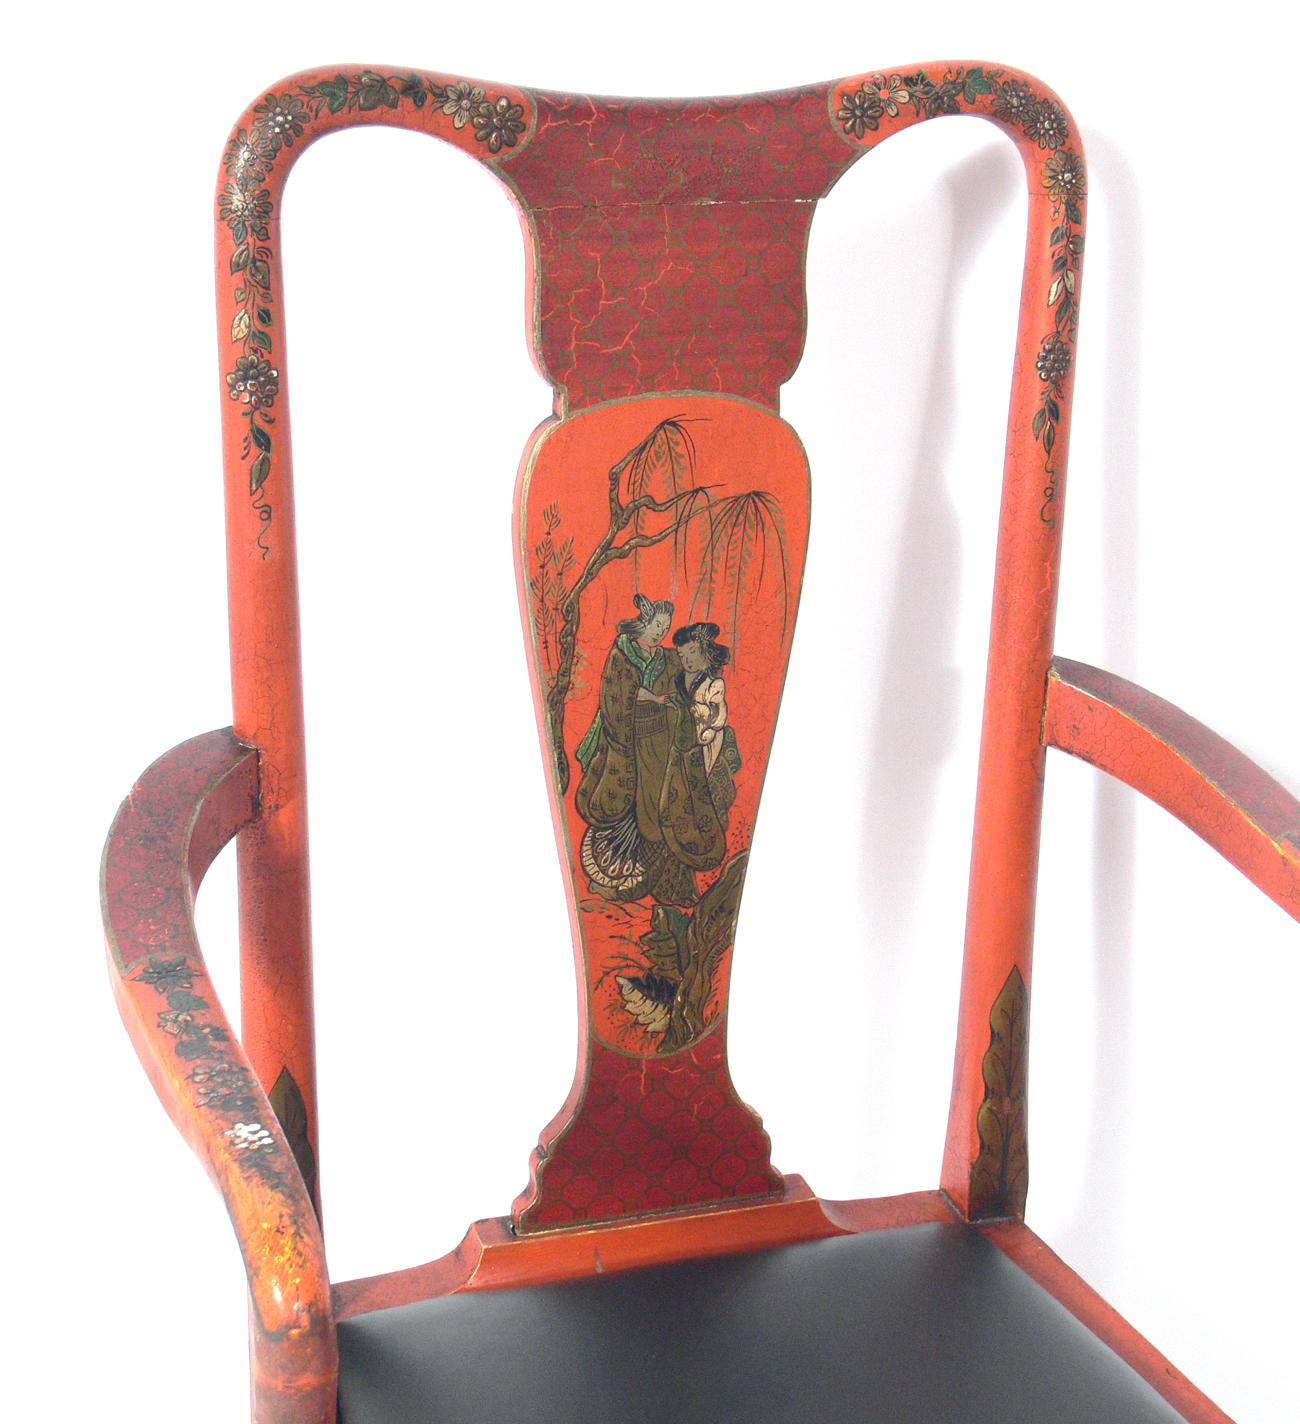 Pair of antique Chinoiserie chairs, probably French, 19th century. They retain their wonderful deep orange color with hand painted decoration.